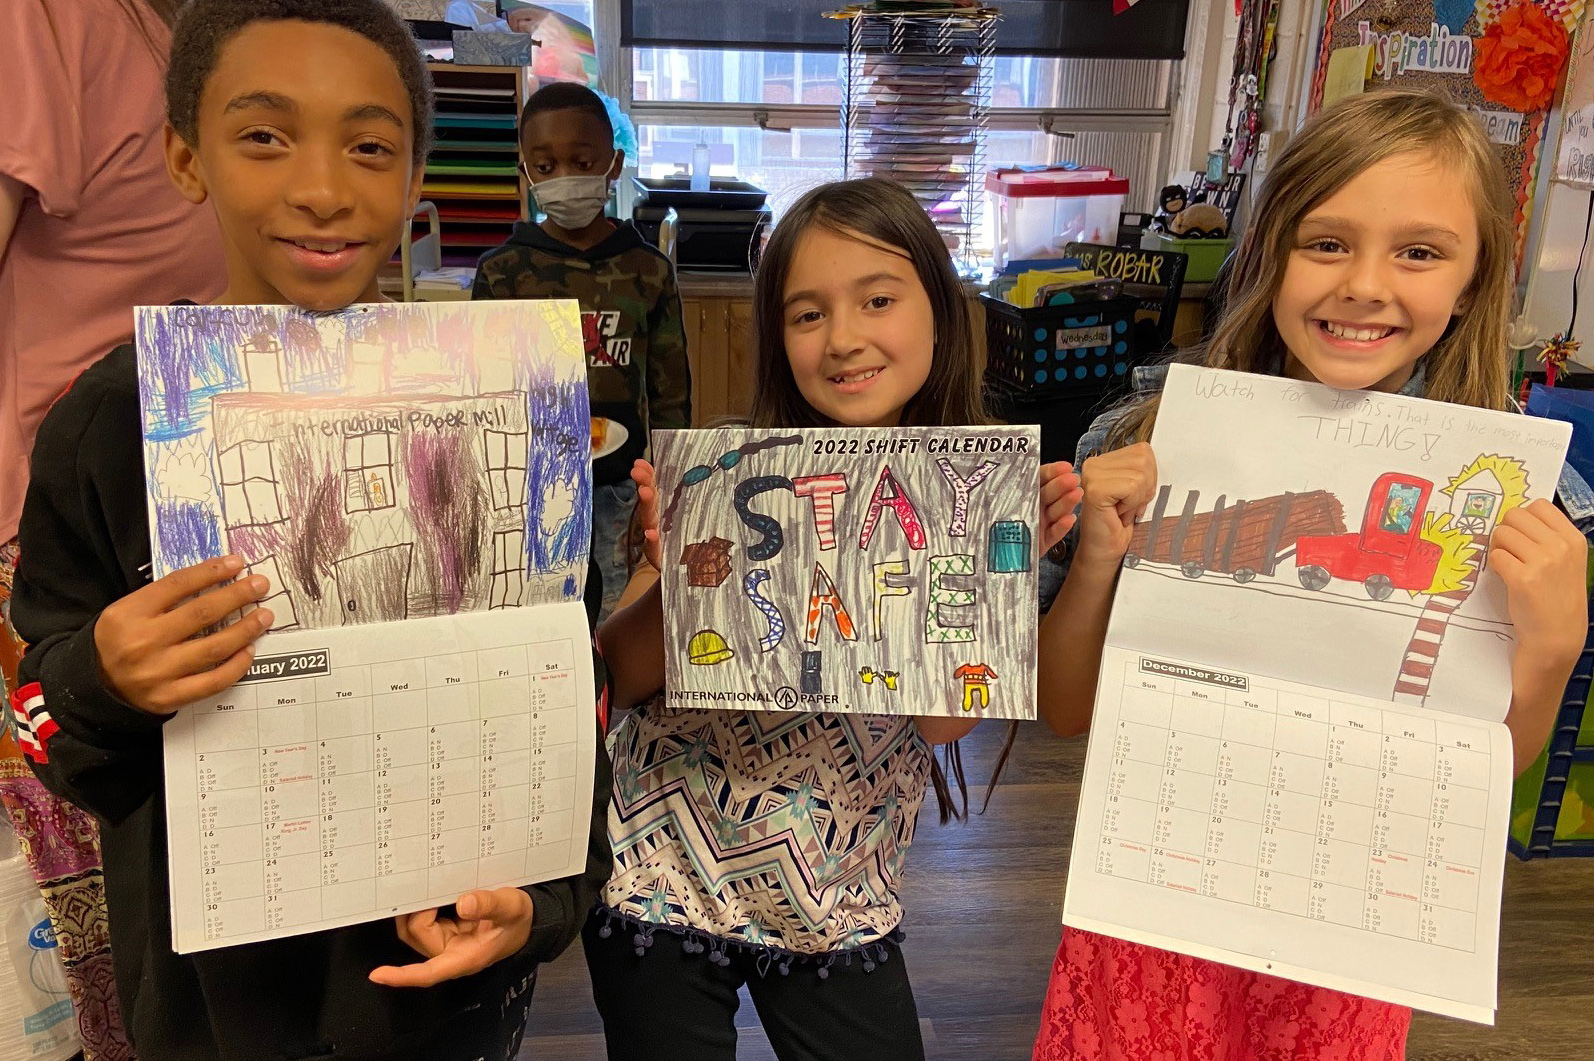 IP Shift Safety Calendar Created By Jim Allen Elementary Students